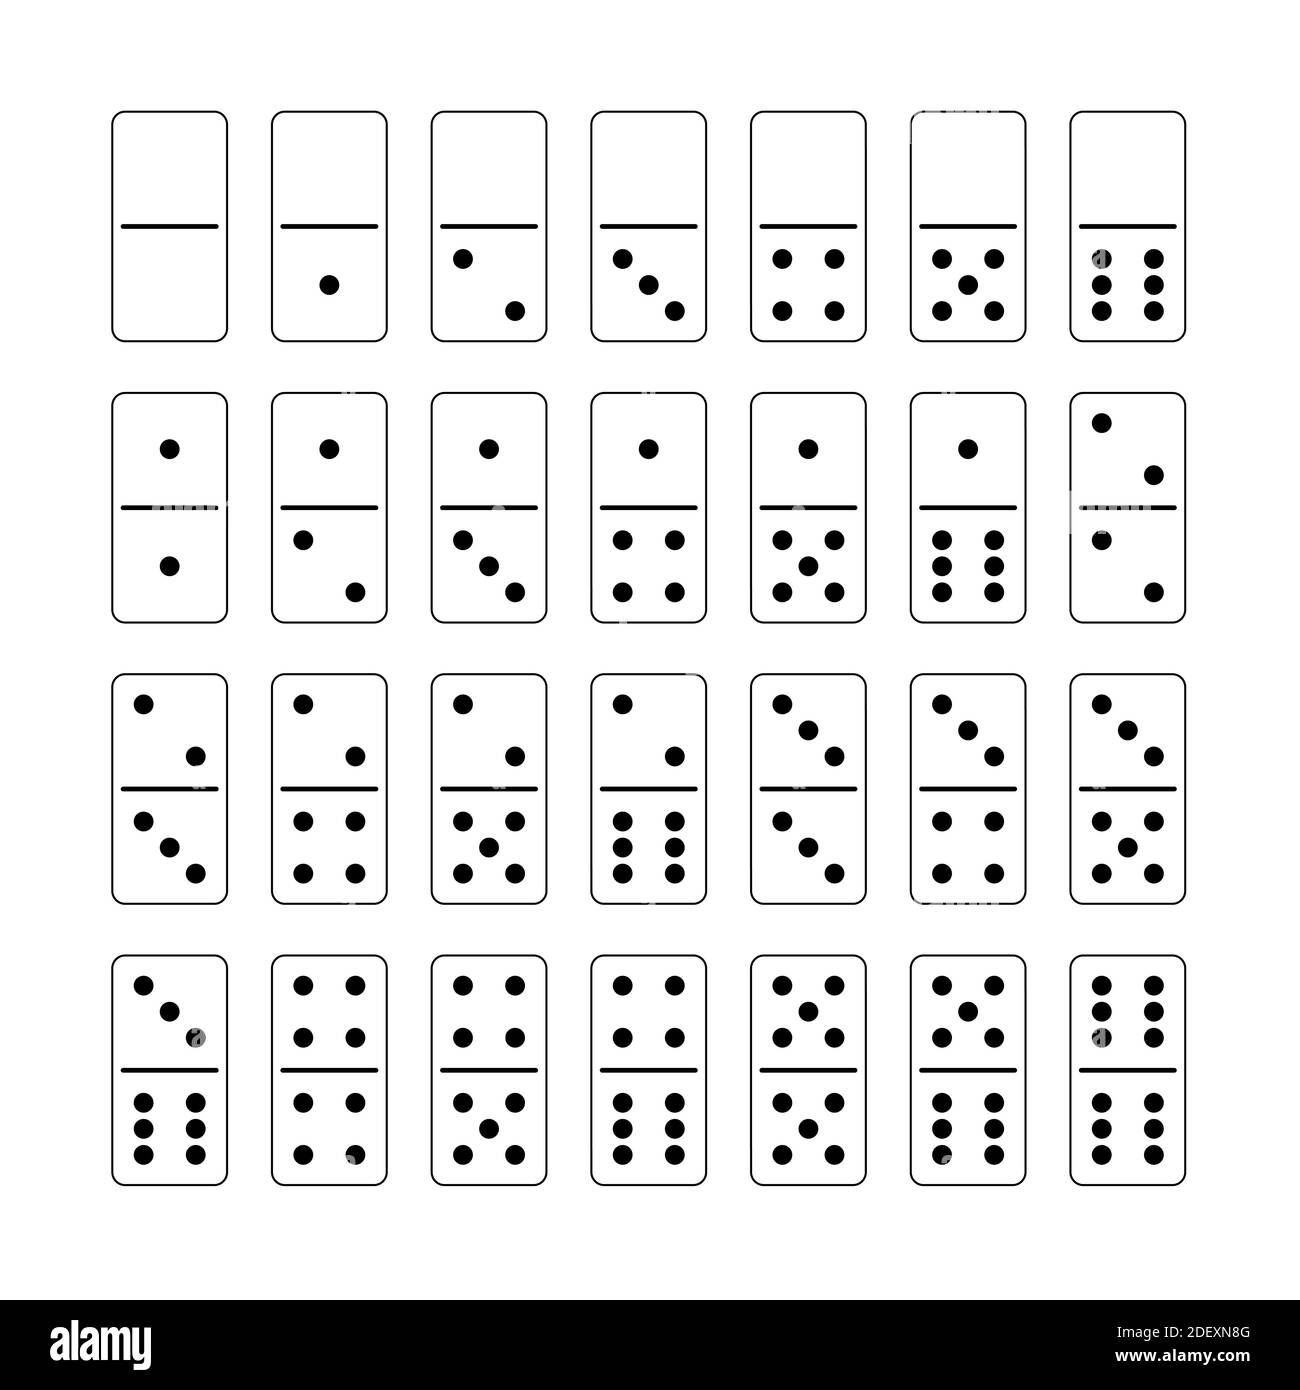 Domino set. Complete assorted game, collection of 28 arranged white tiles  with black dots - outline illustration on white background Stock Photo -  Alamy